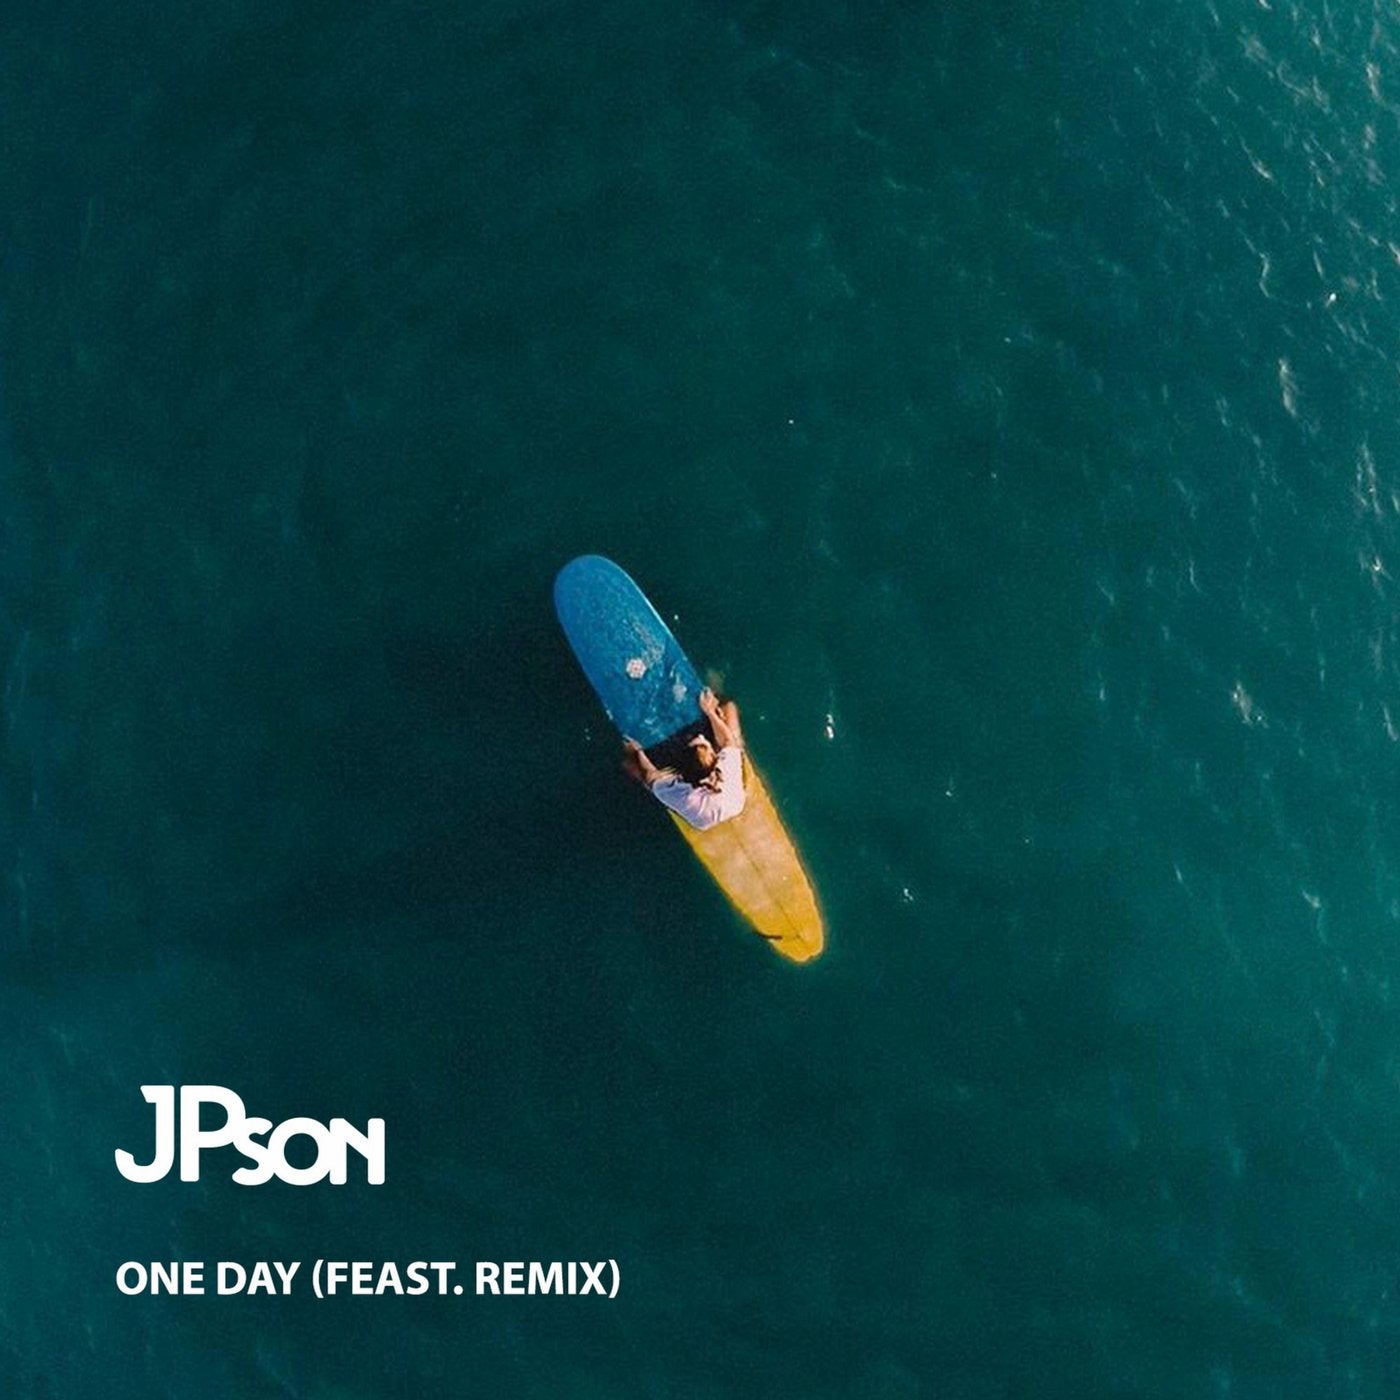 One Day (FEAST.REMIX)